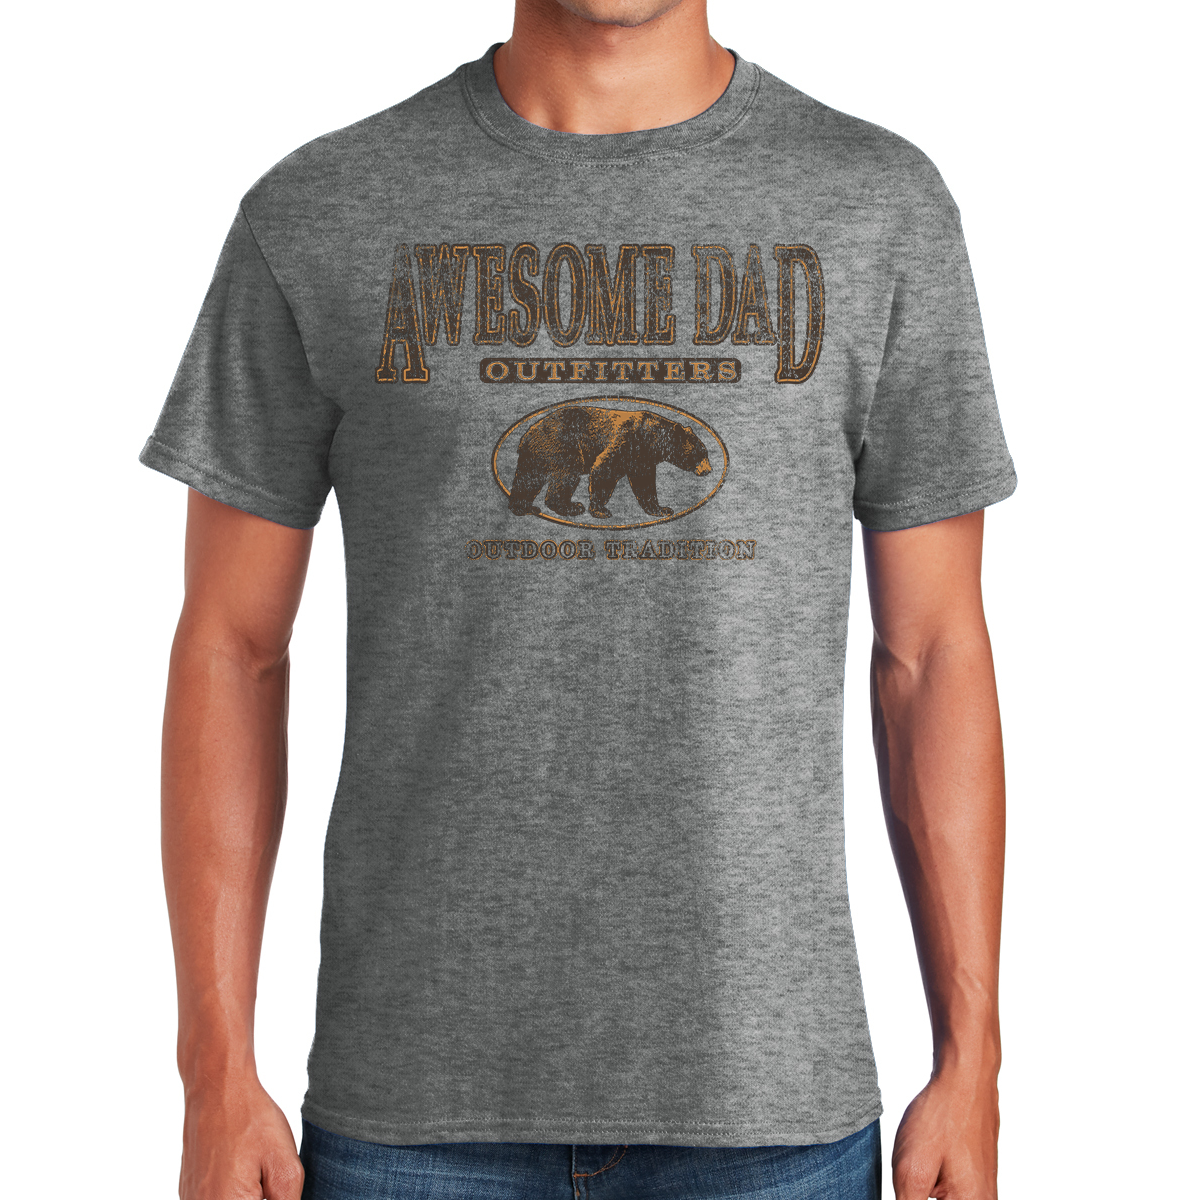 Awesome Dad Outfitters Outdoor Tradition Bear With Me Gifts for Dads T-shirt